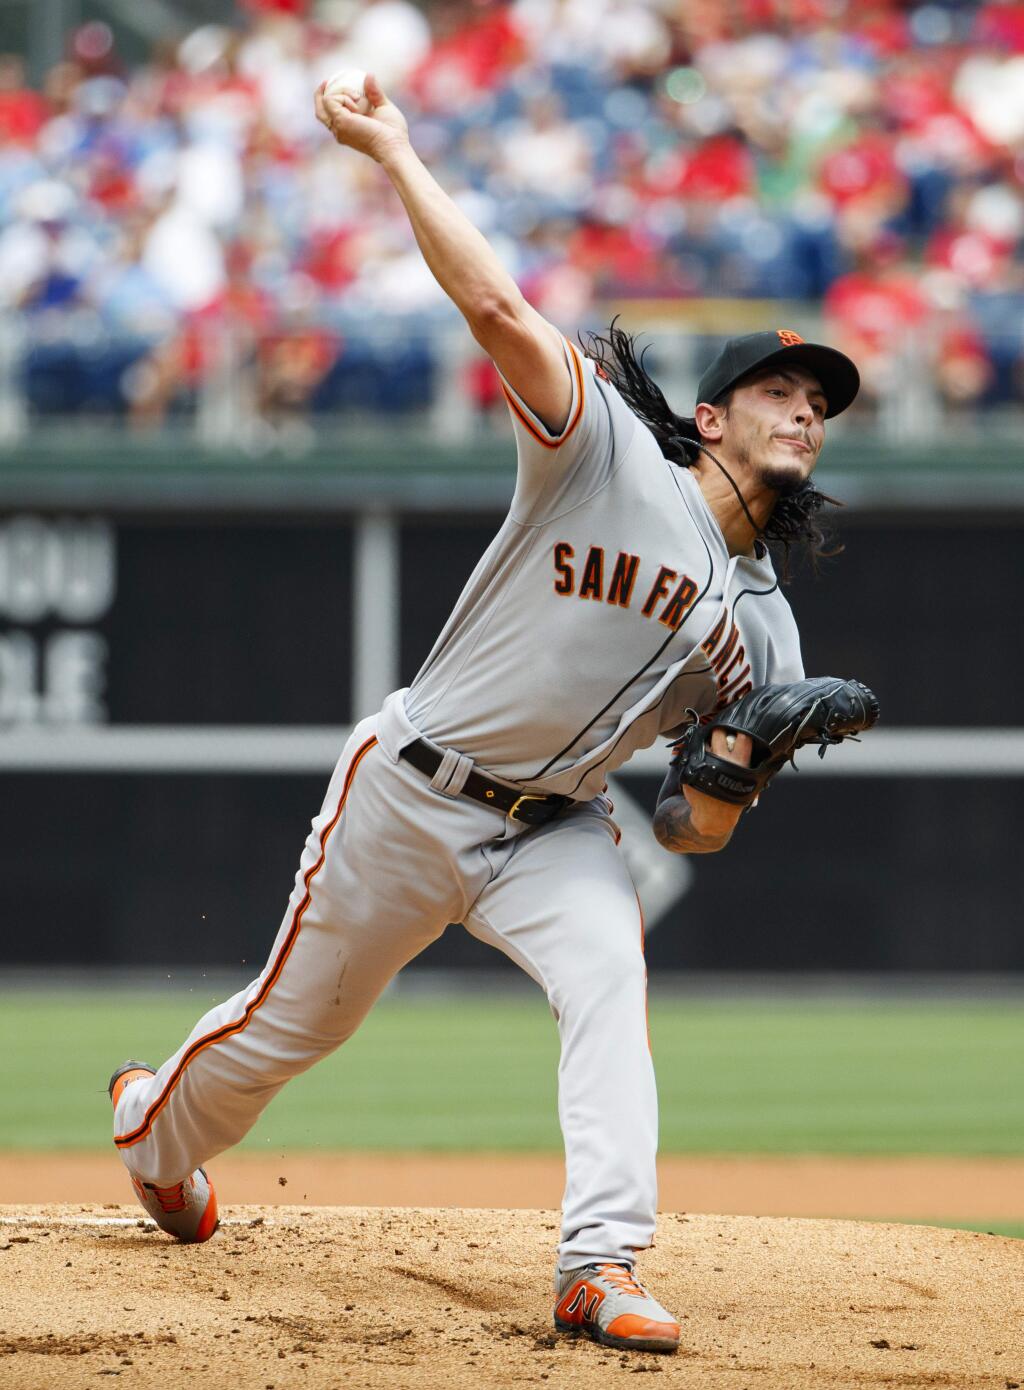 San Francisco Giants starting pitcher Dereck Rodriguez throws a pitch during the first inning against the Philadelphia Phillies, Thursday, Aug. 1, 2019, in Philadelphia. (AP Photo/Chris Szagola)